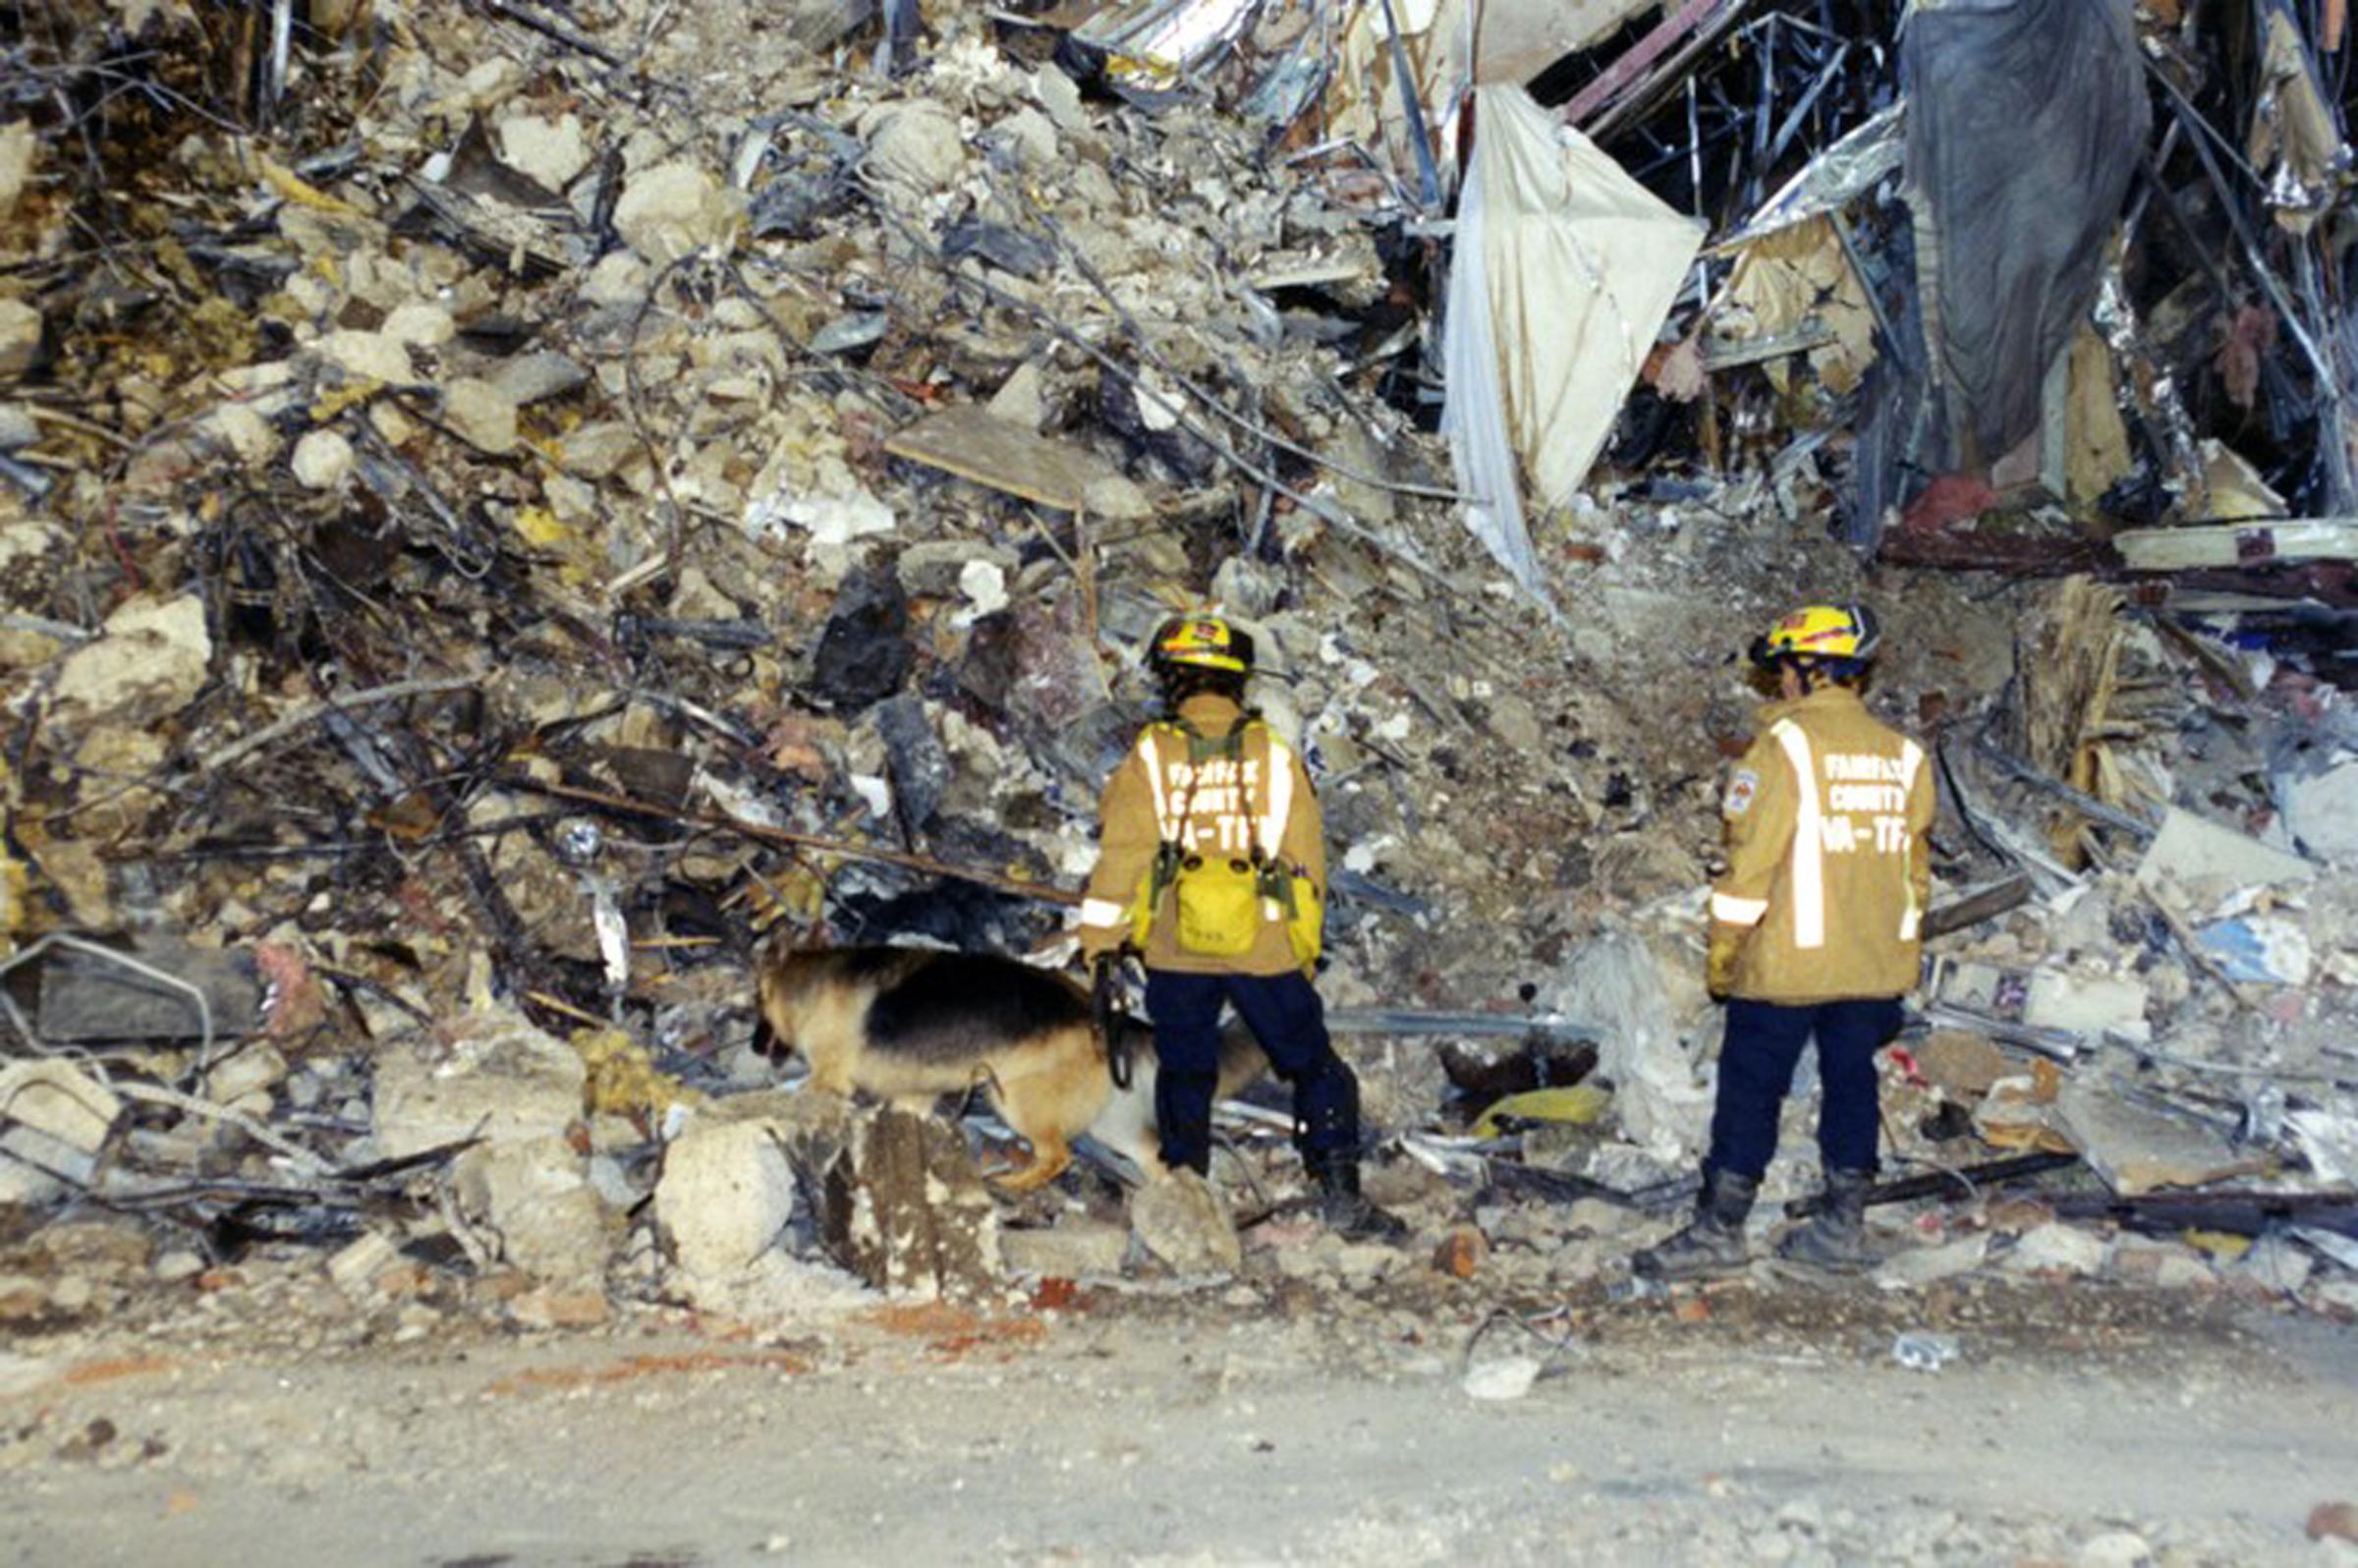 FBI releases images of damage done to Pentagon during September 11th terrorist attacks